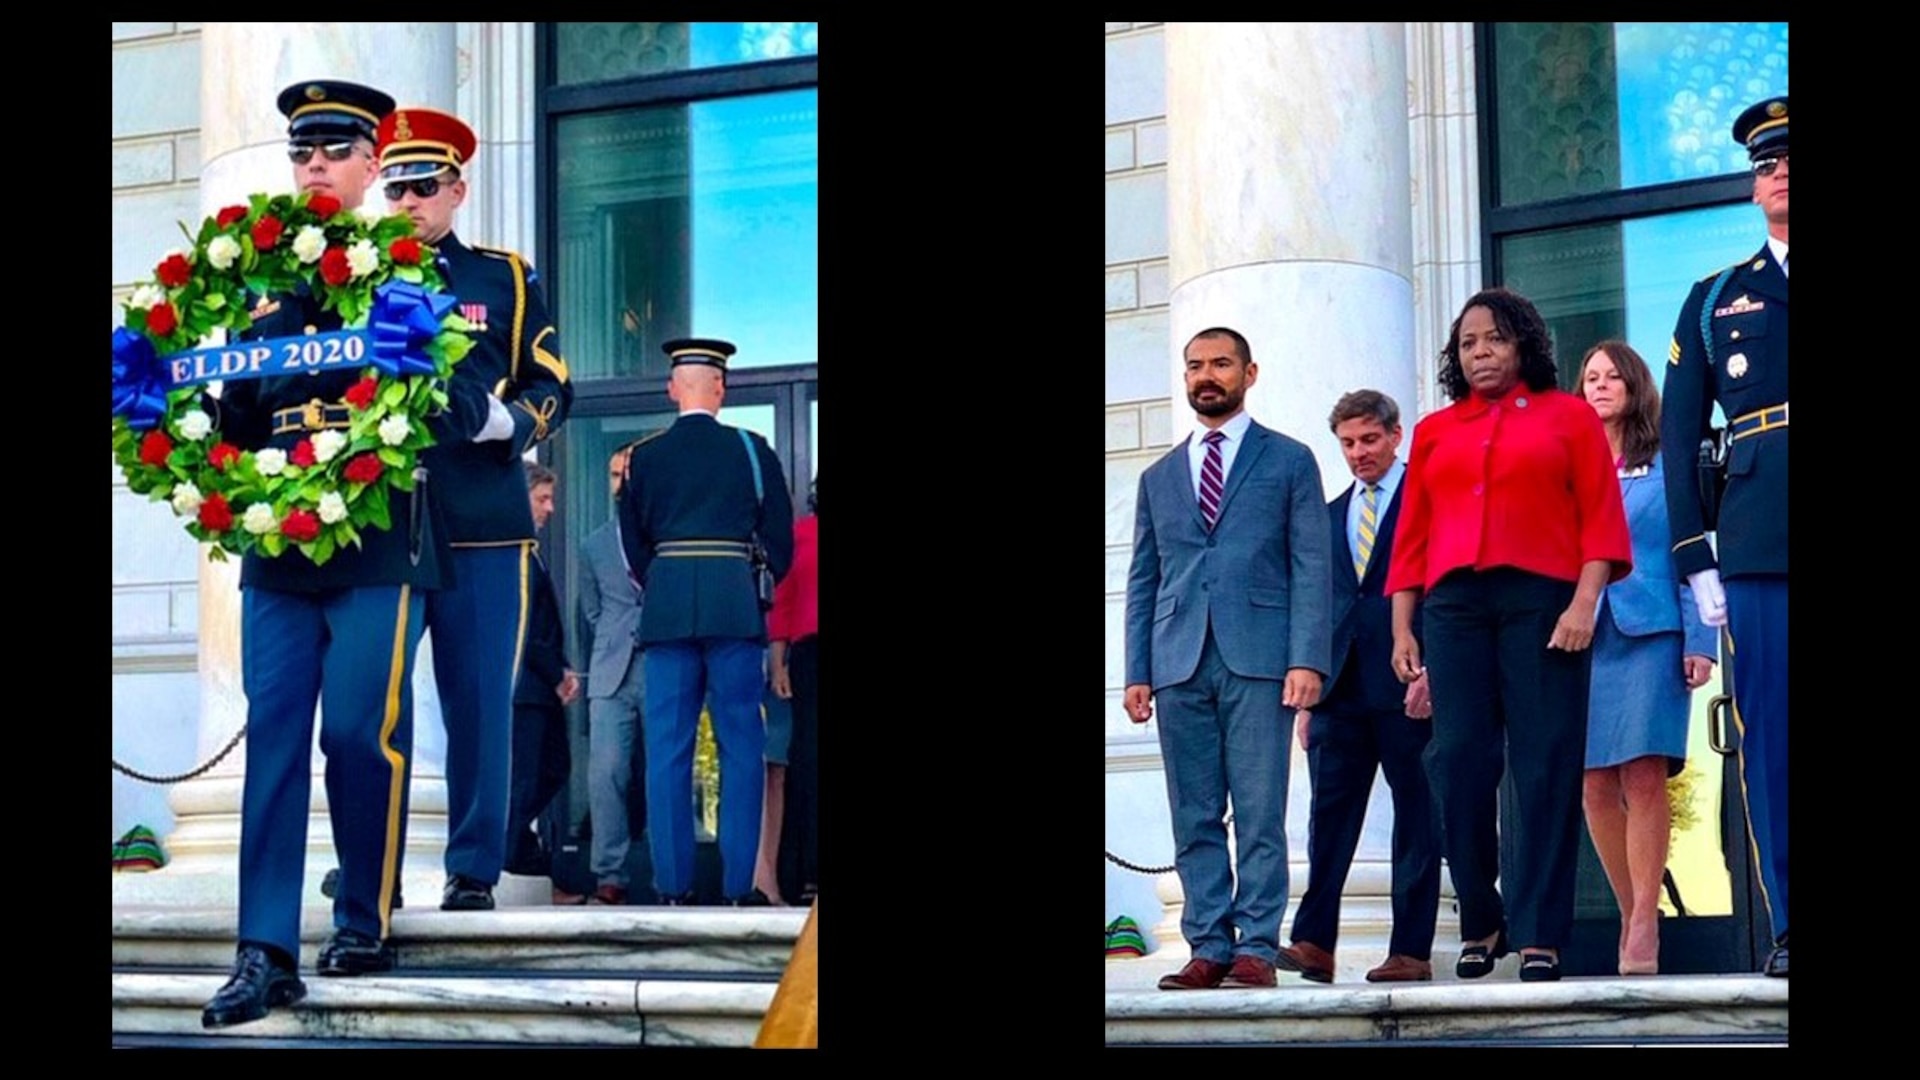 Distribution’s Diggs participates in a once in a lifetime event at the Tomb of the Unknown Soldier